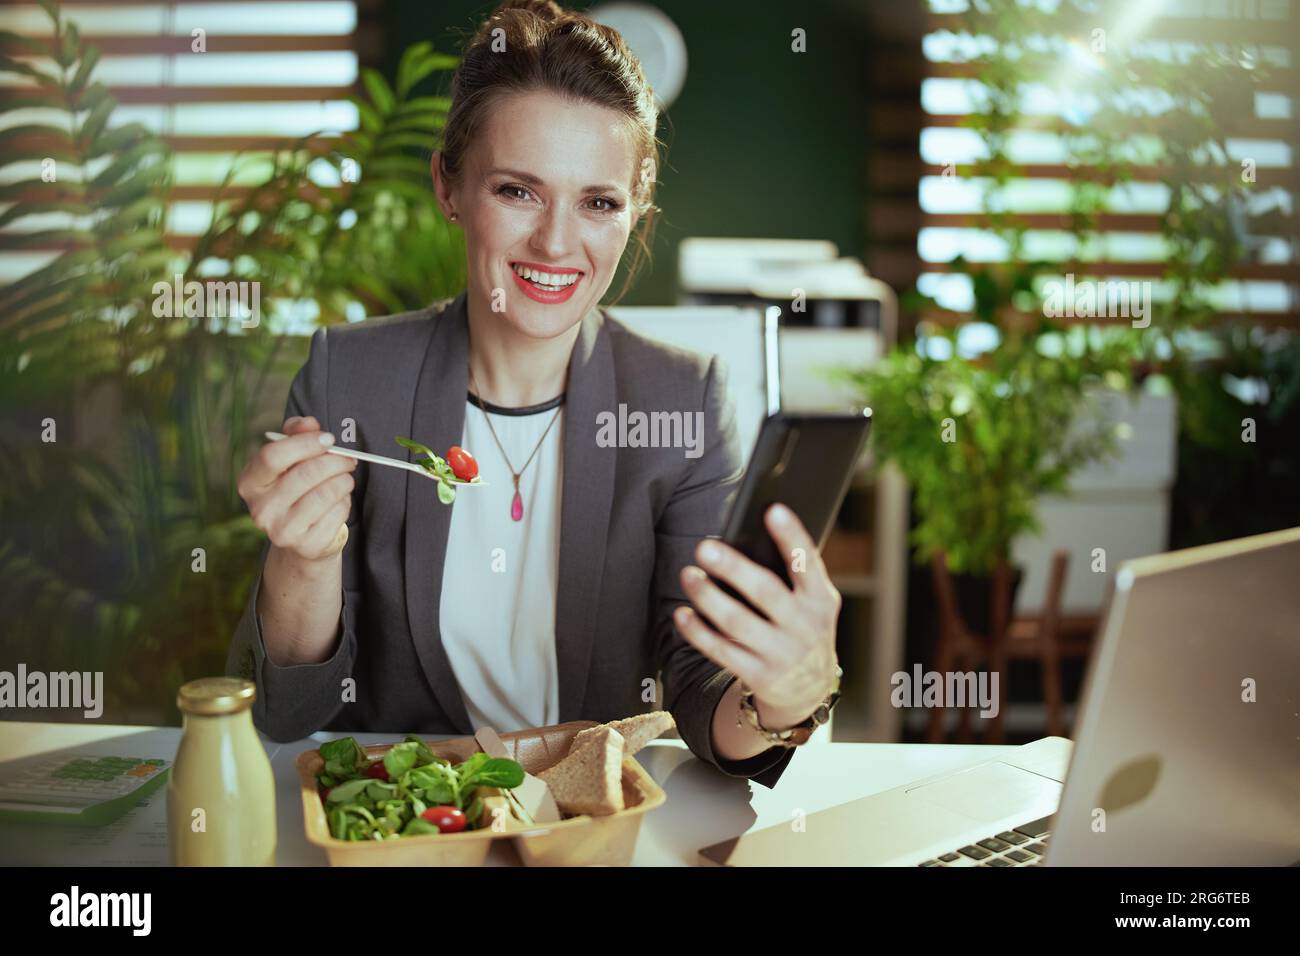 Sustainable workplace. smiling modern 40 years old woman worker in a grey business suit in modern green office with laptop and smartphone eating salad Stock Photo